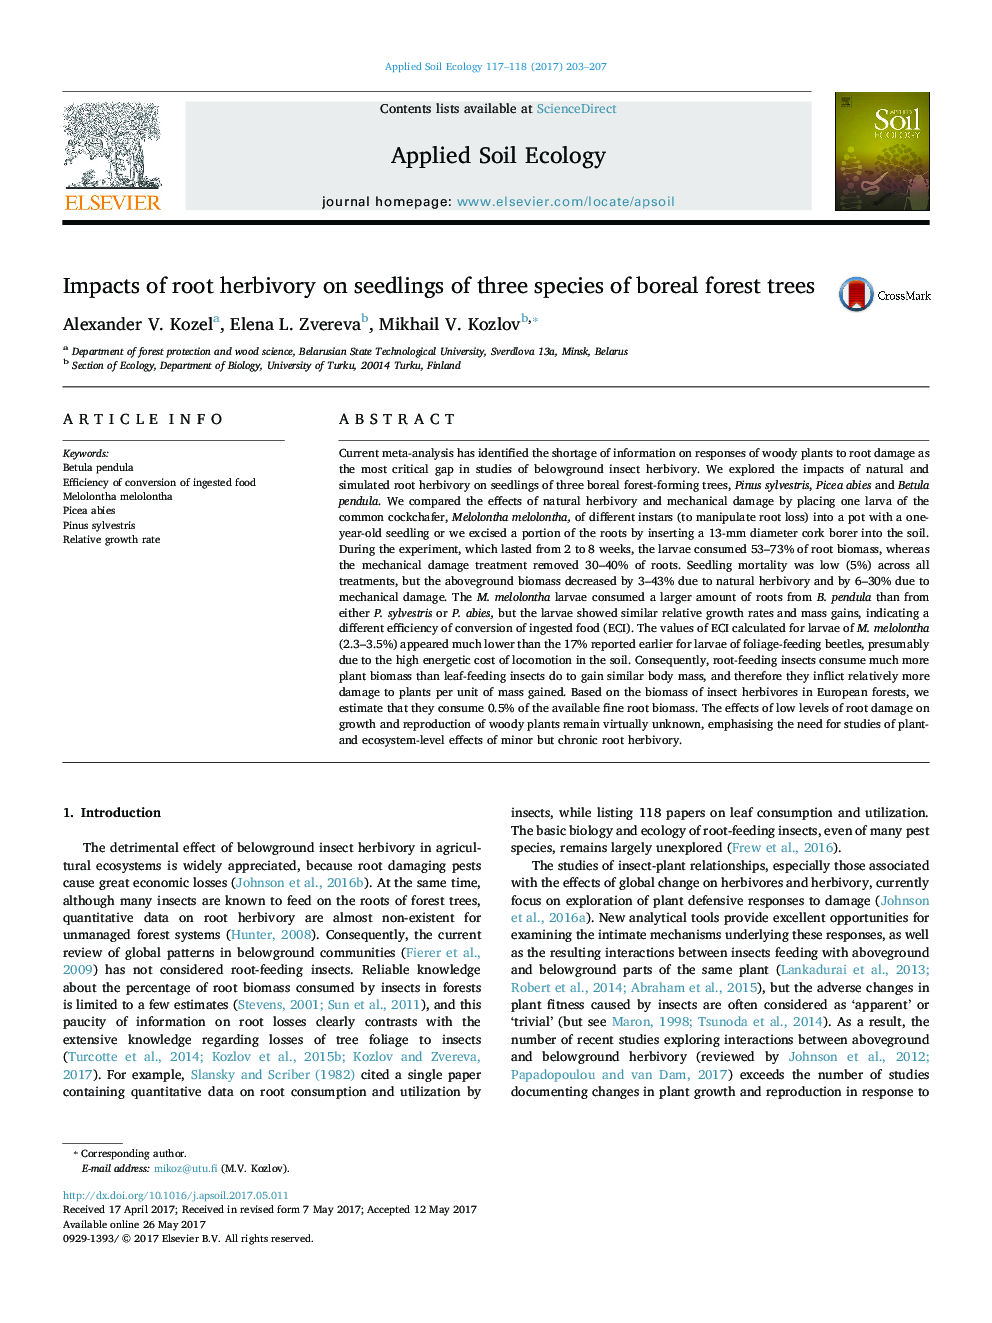 Impacts of root herbivory on seedlings of three species of boreal forest trees